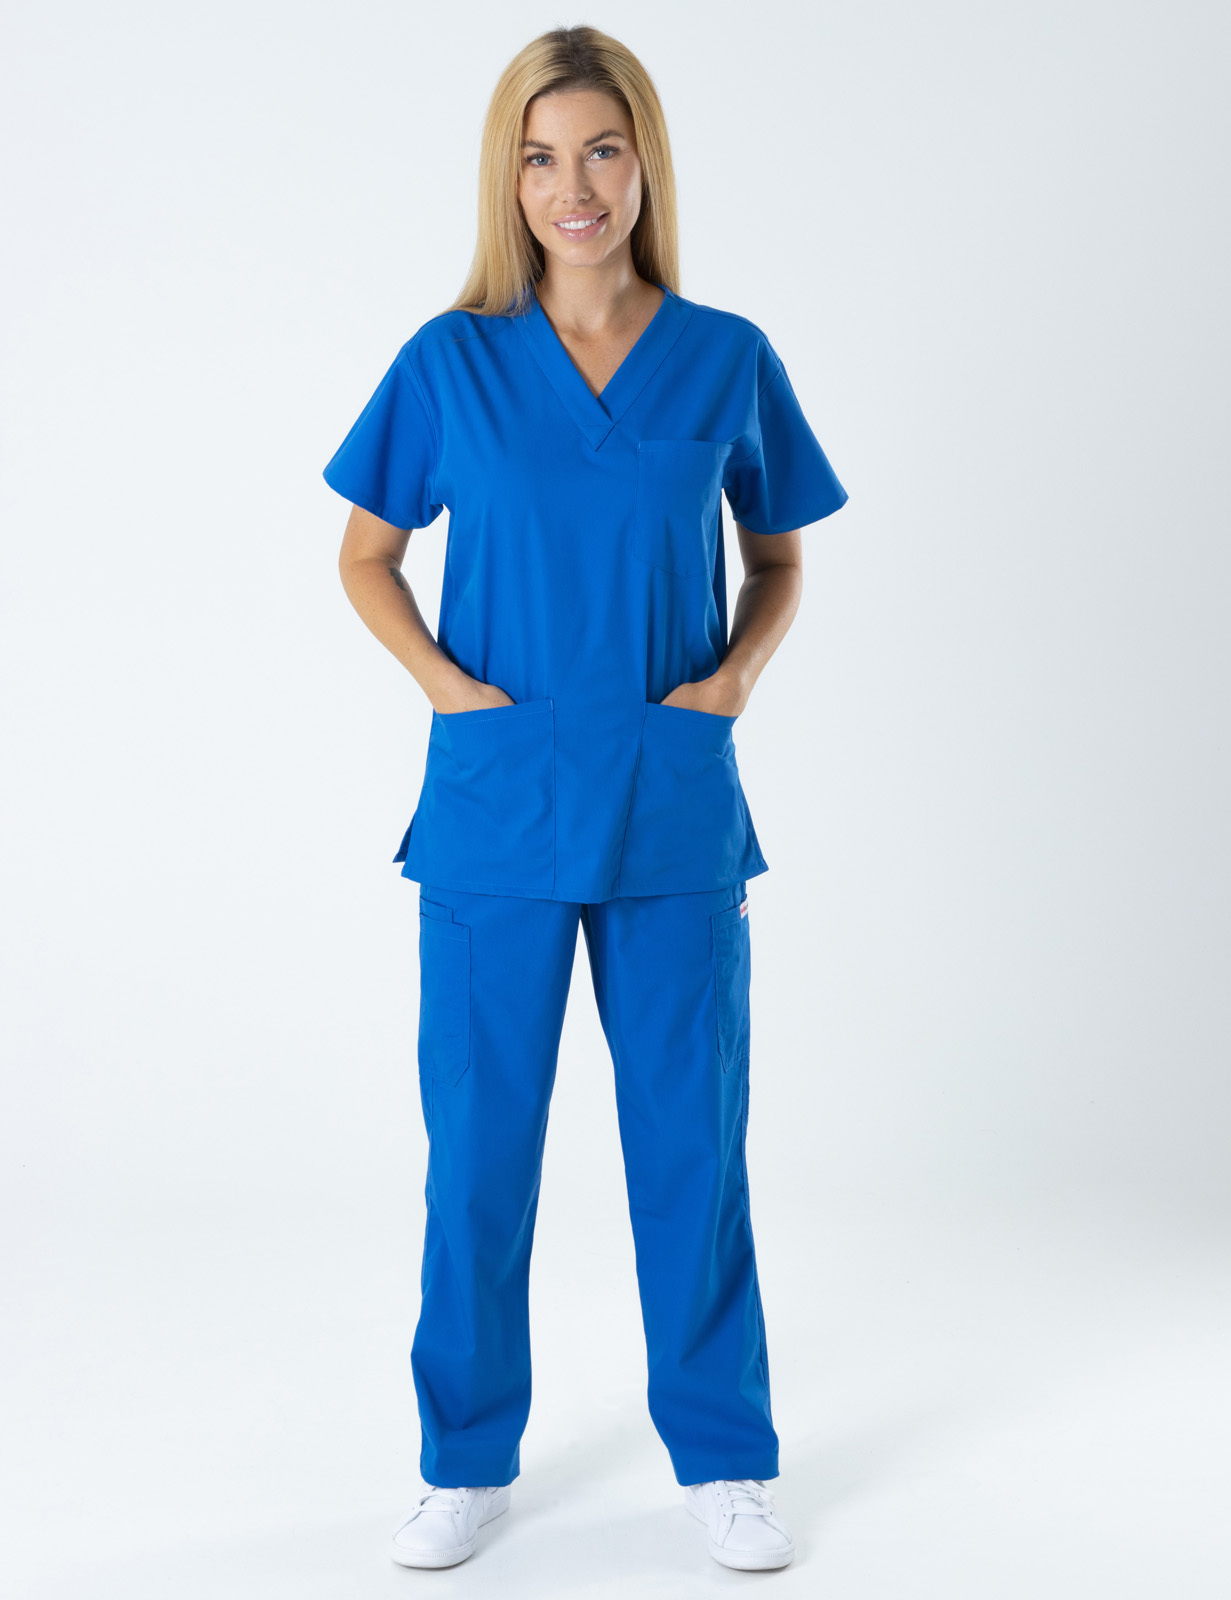 Children's Hospital Melbourne - ED (4 Pocket Scrub Top and Cargo Pants in Royal incl Logos)